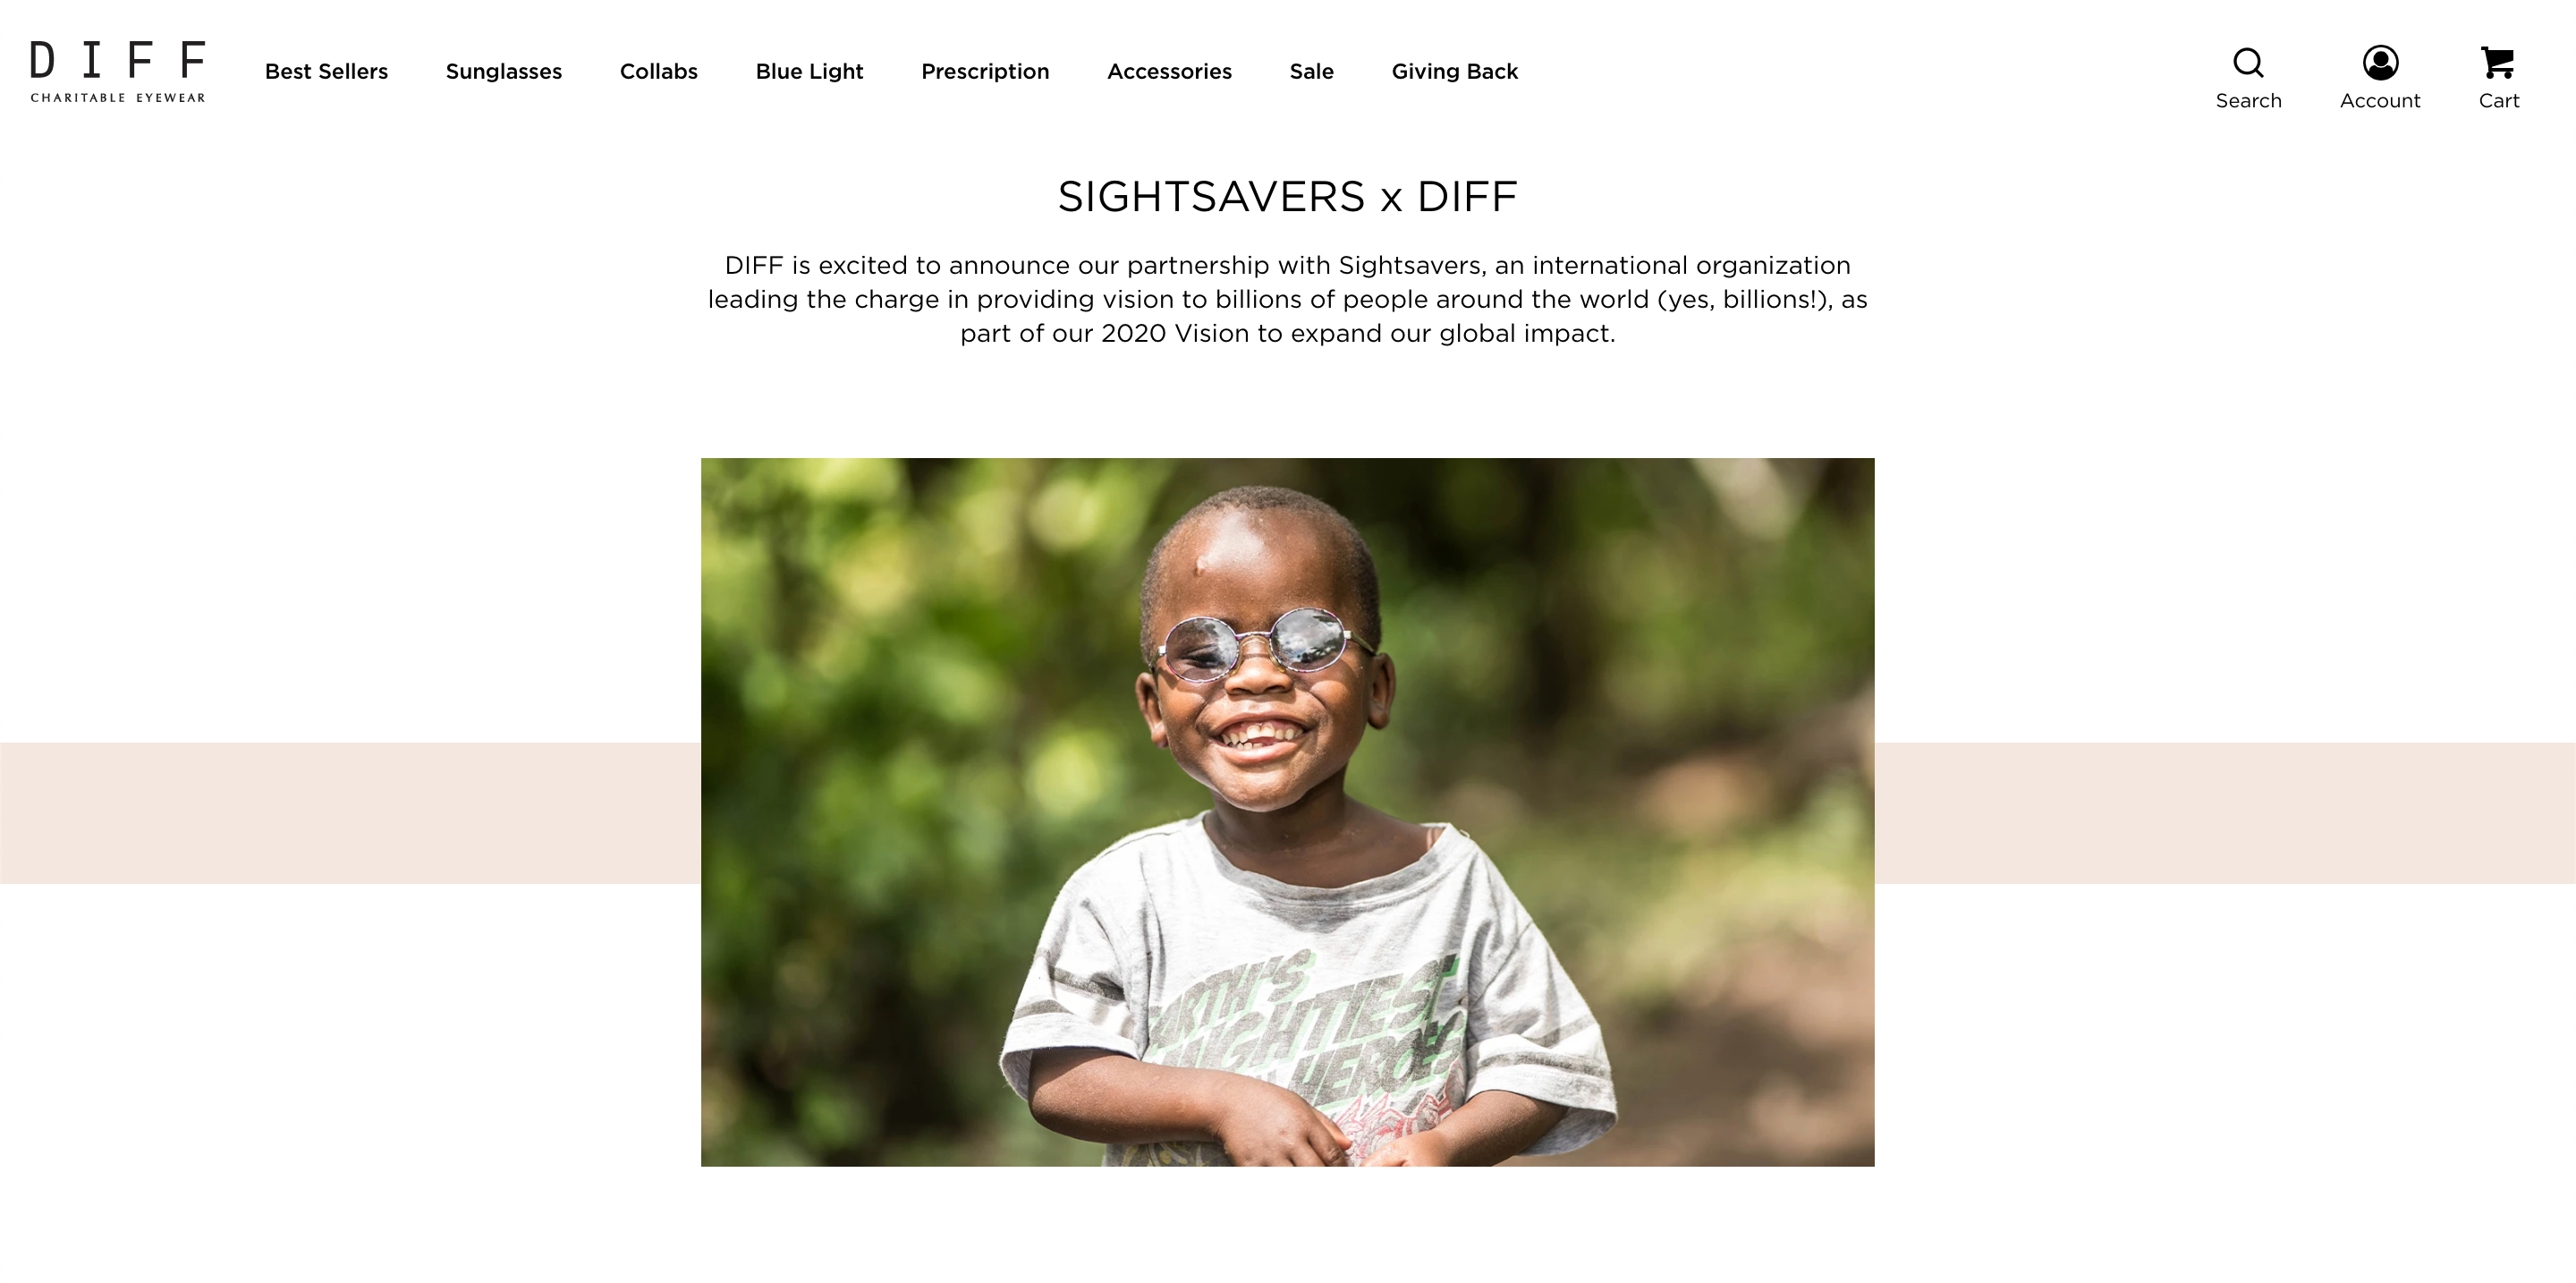 Diff website section describing their collaboration with Sightsavers